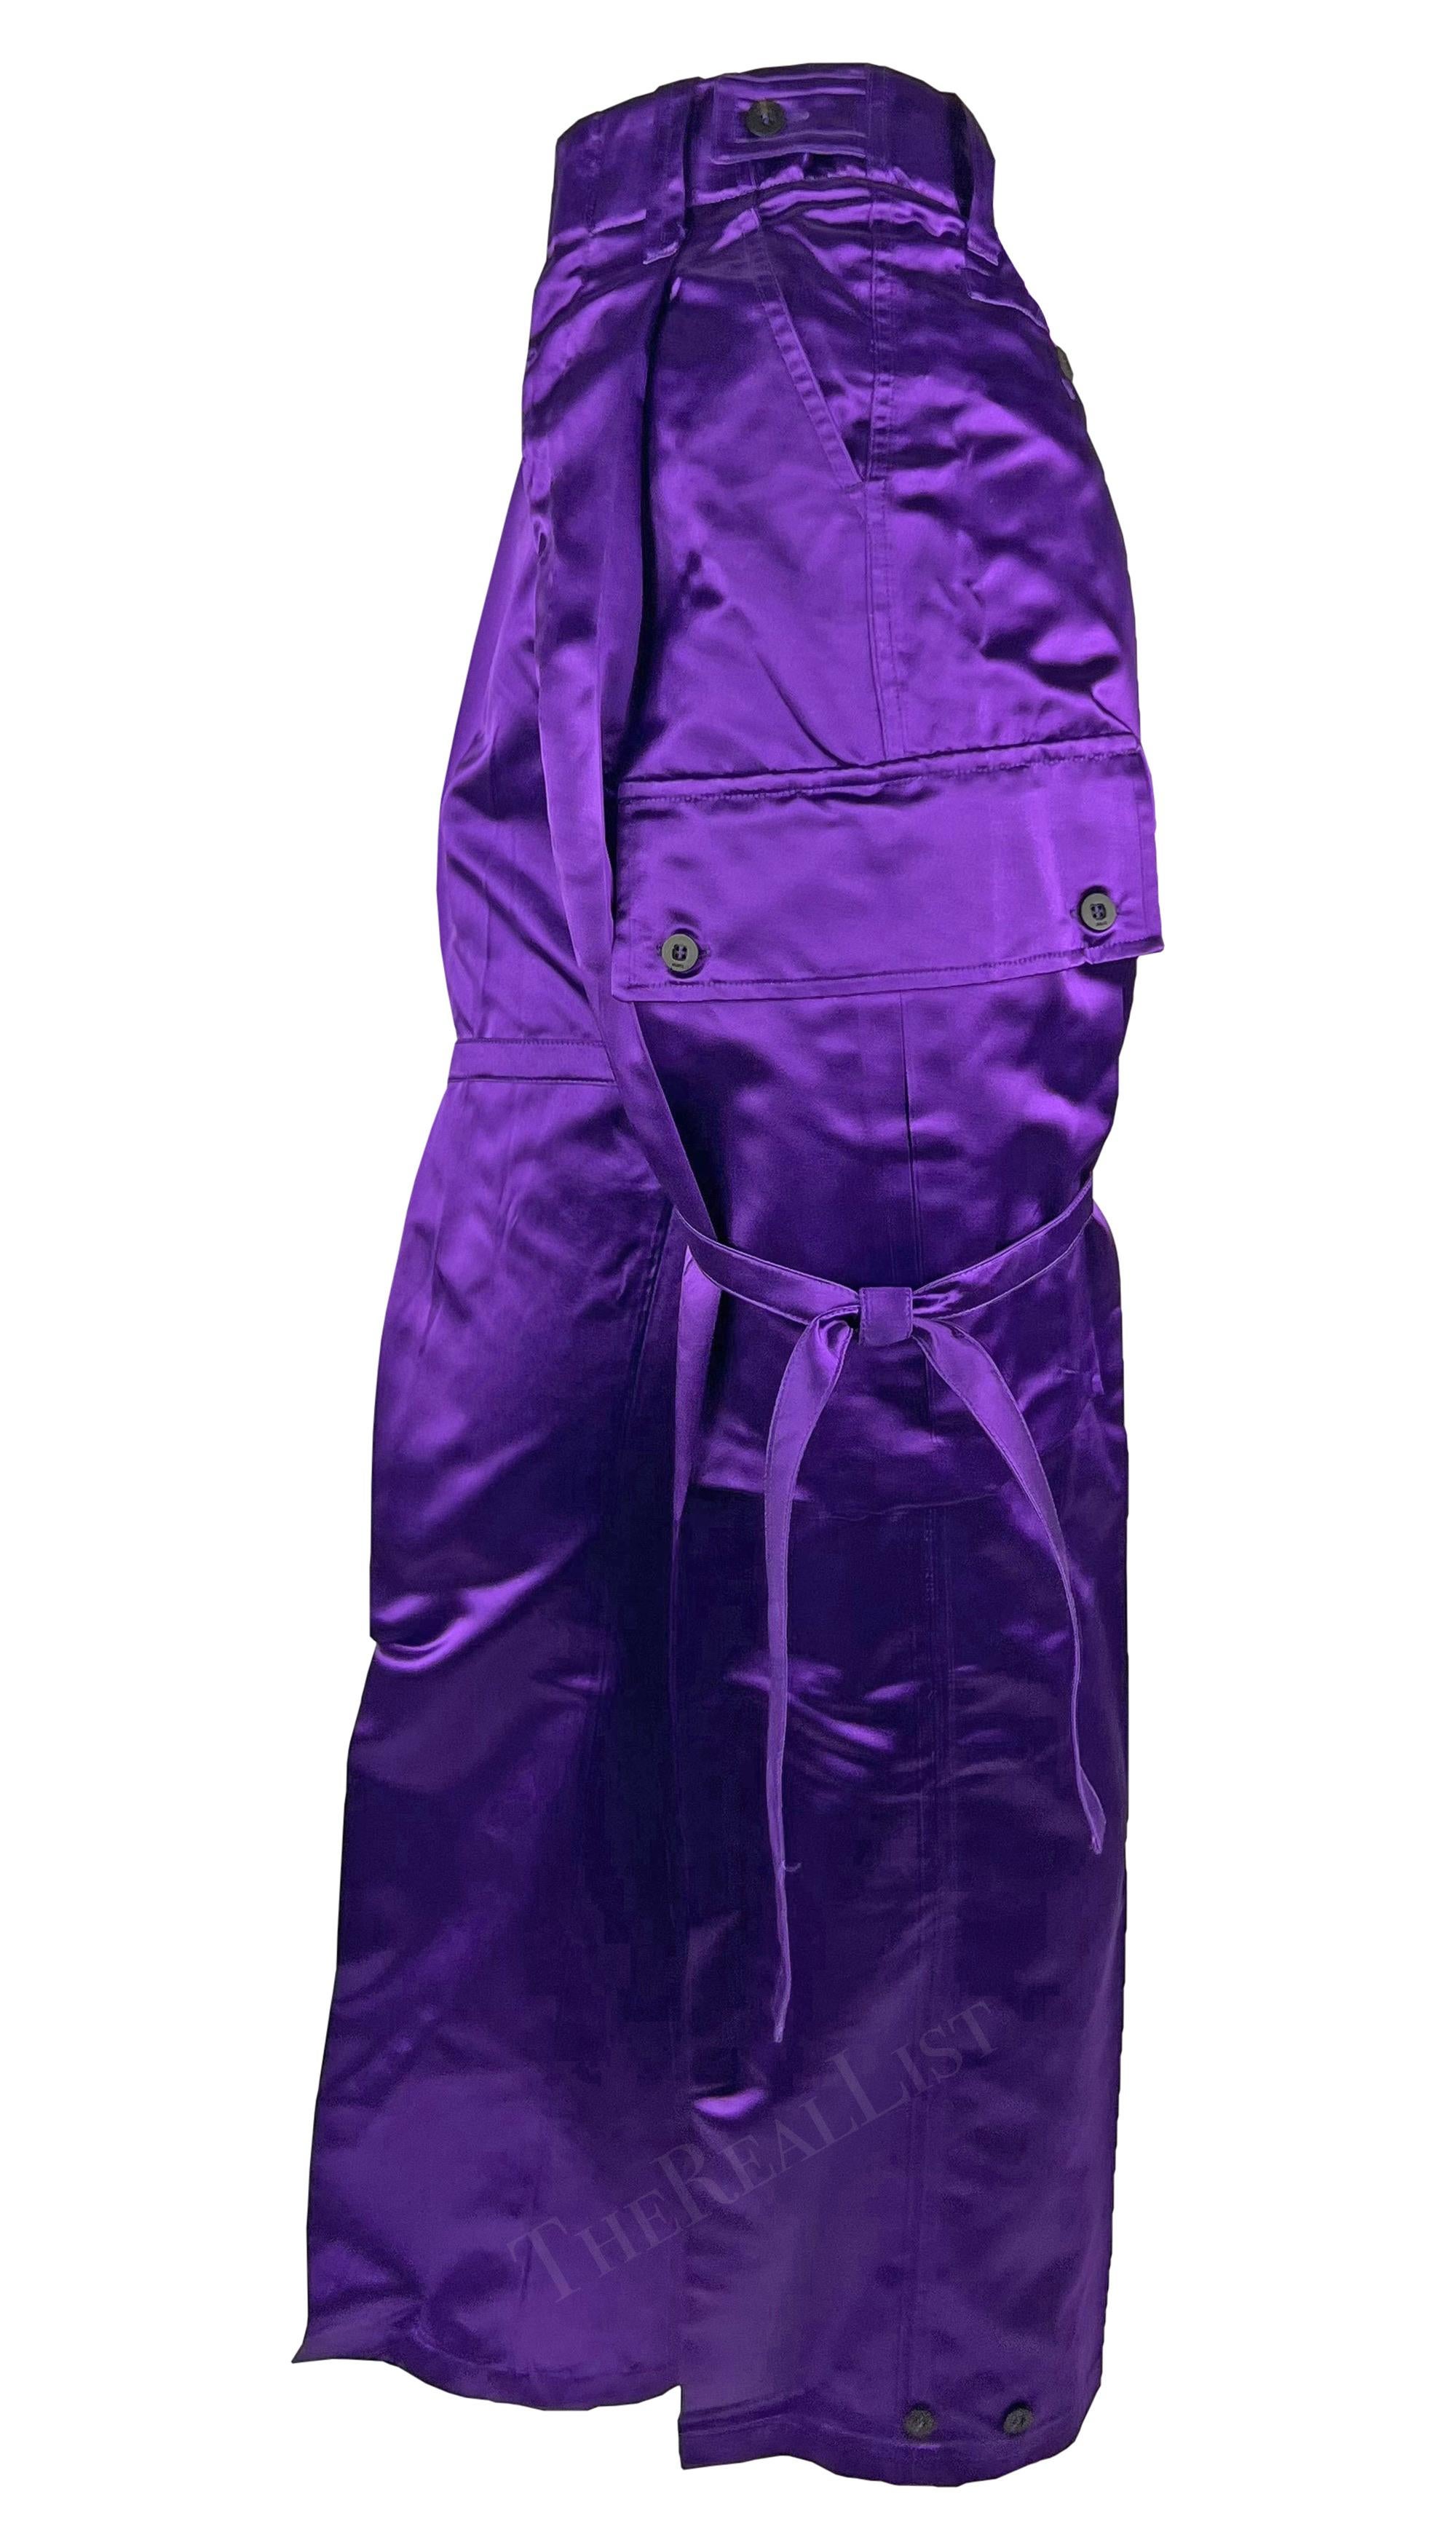 NWT S/S 2001 Gucci by Tom Ford Runway Purple Satin Tie Wide Leg Cargo Pants  For Sale 1